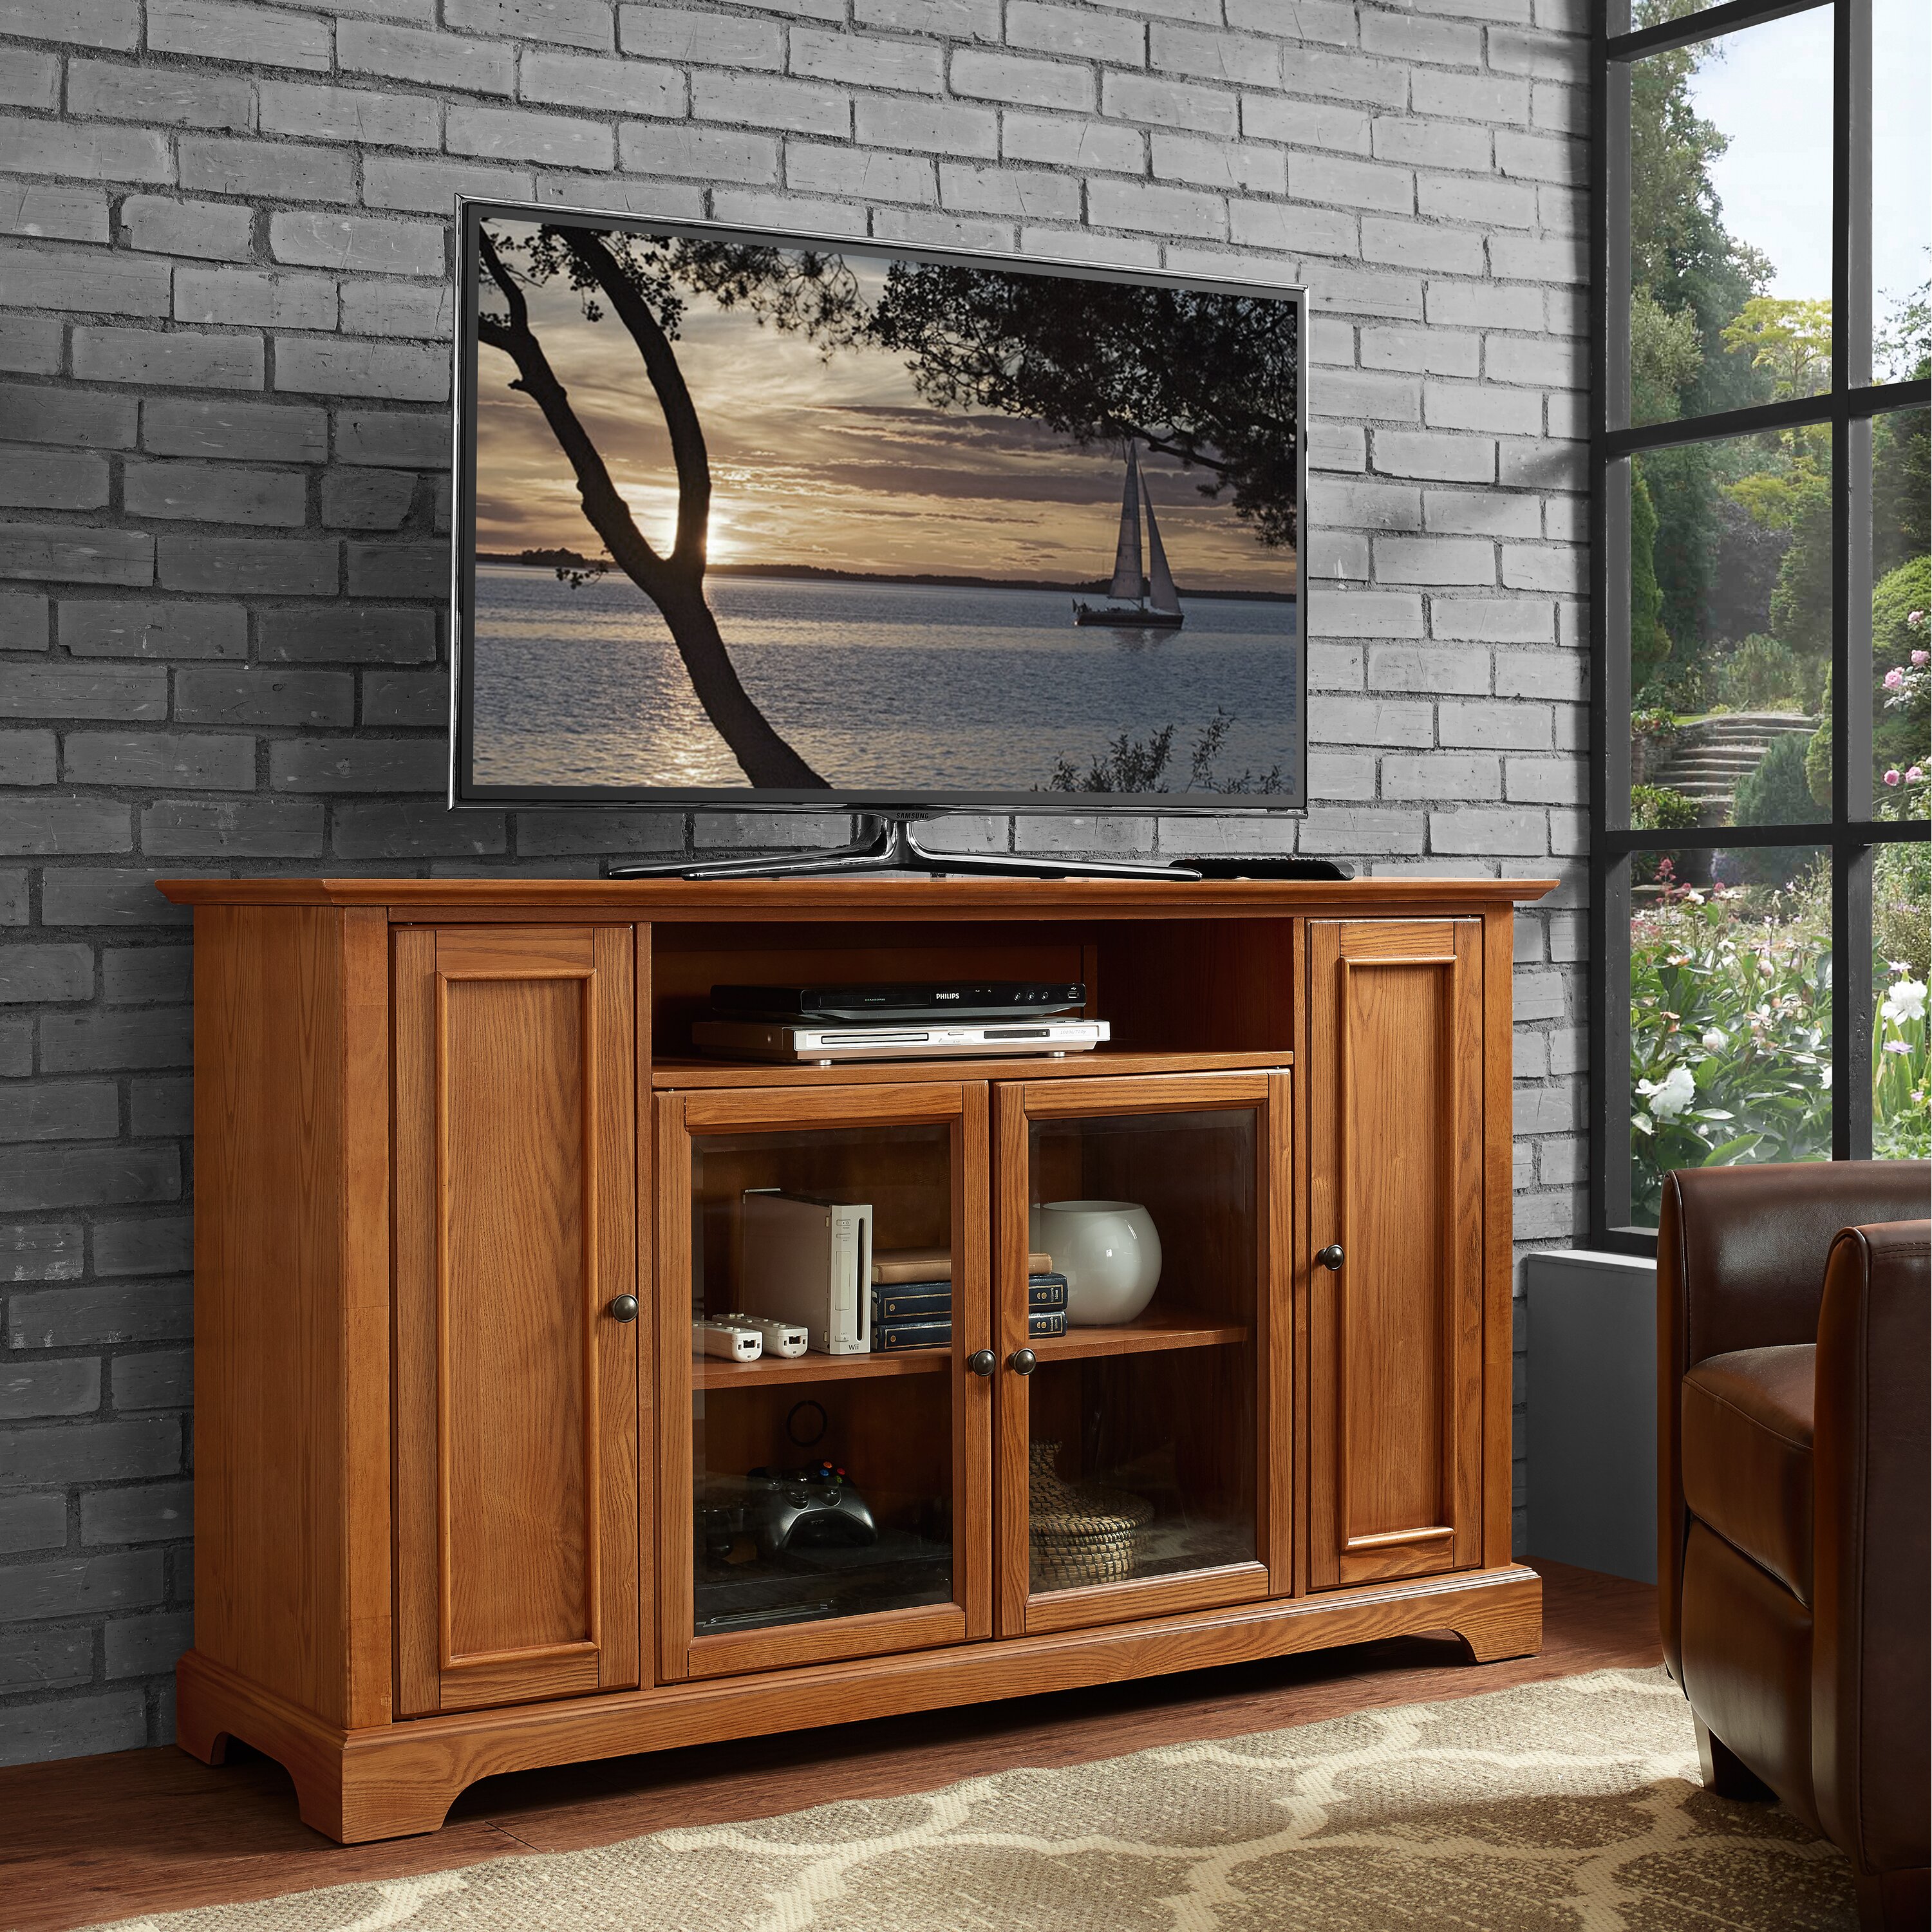 Darby Home Co Edwin Tv Stand And Reviews Wayfair